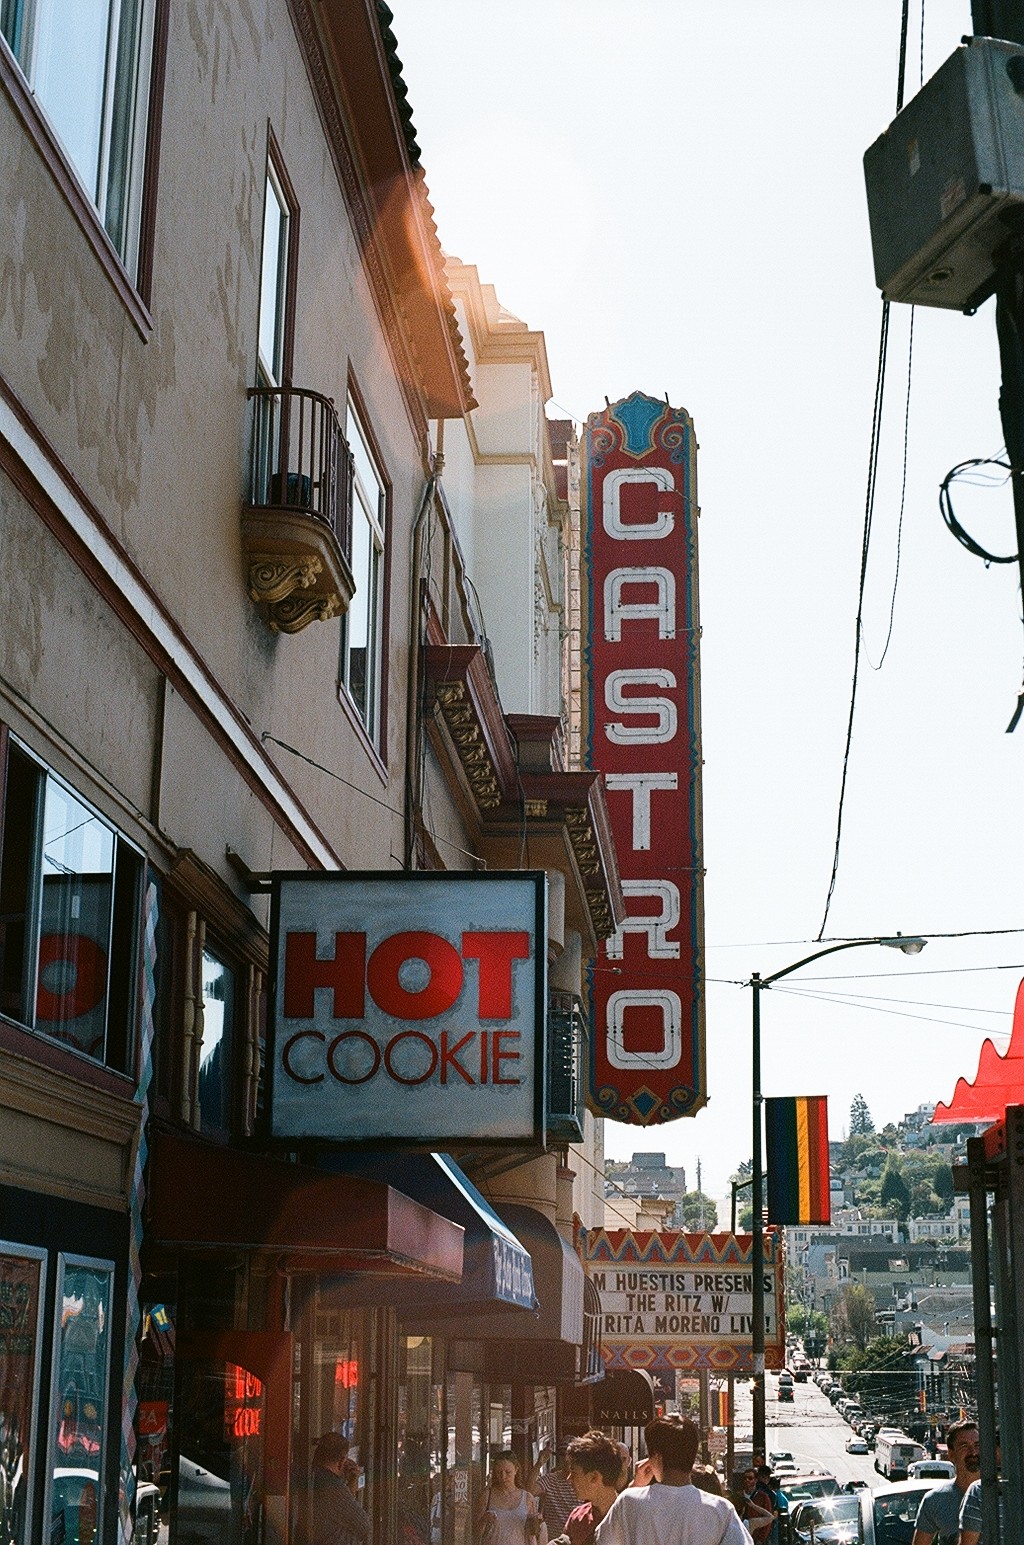 Castro and Hot Cookie